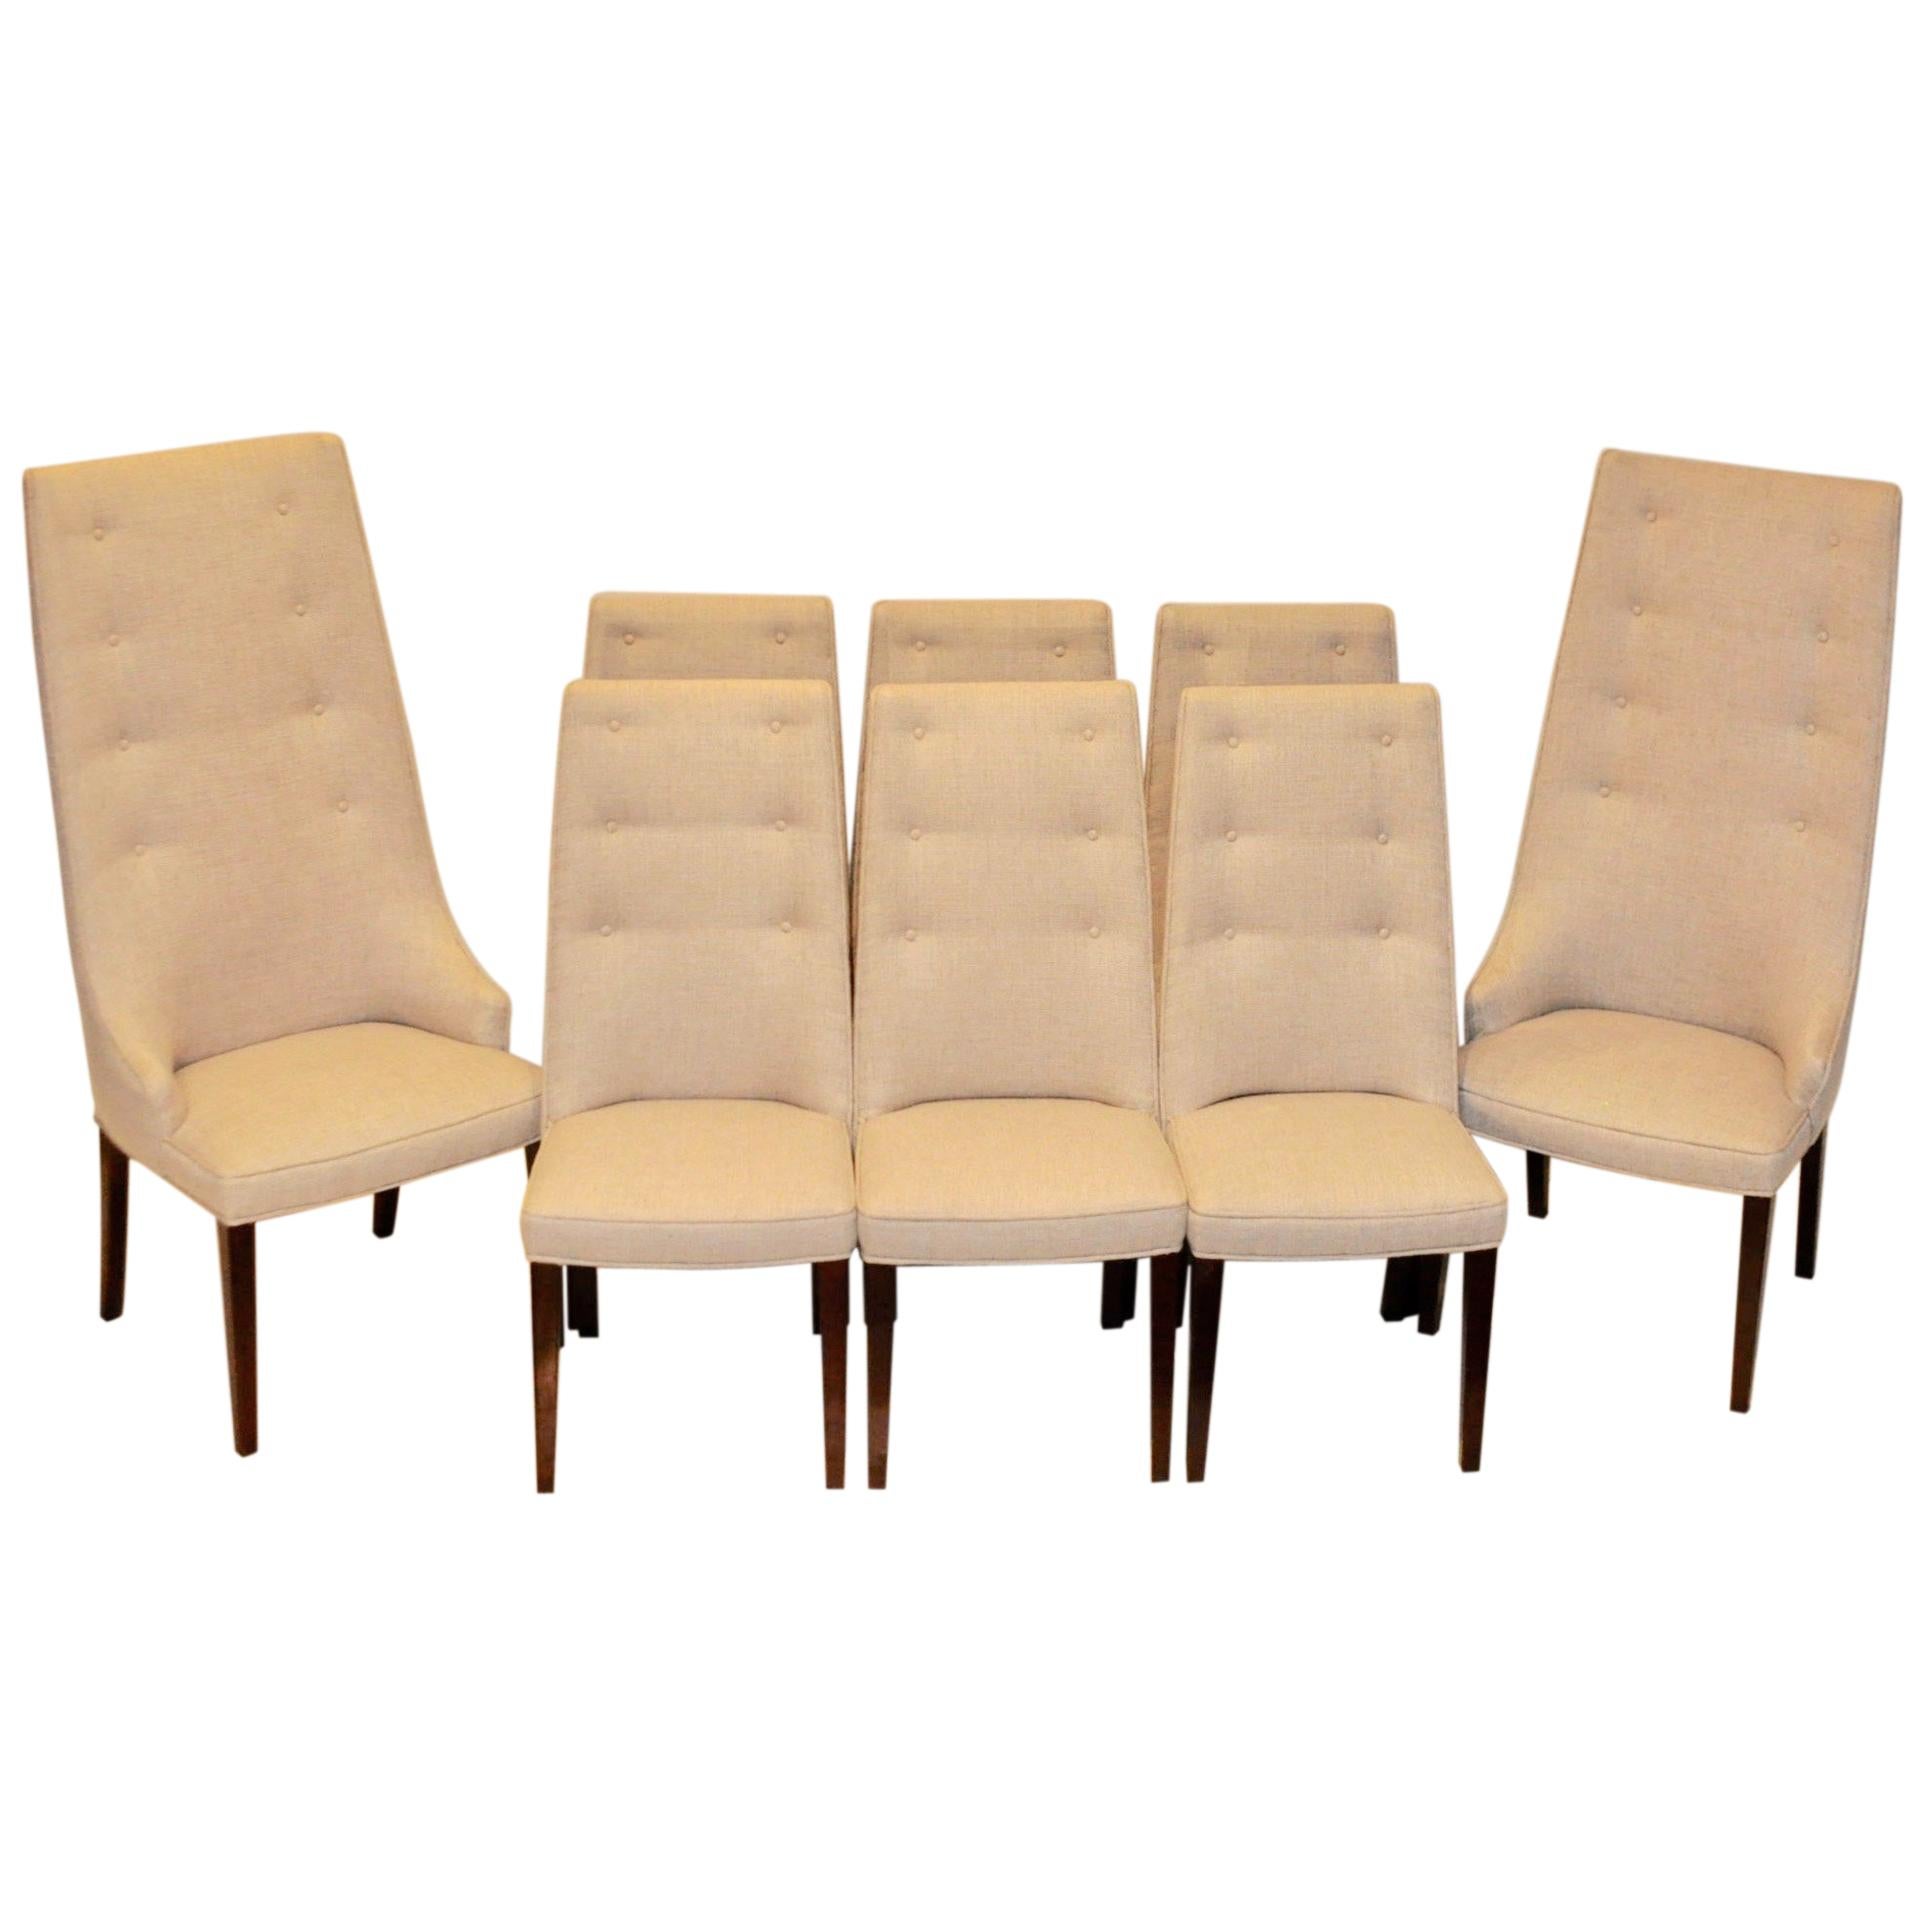 Set of 8 Midcentury High-Backed Dining Chairs from Denmark